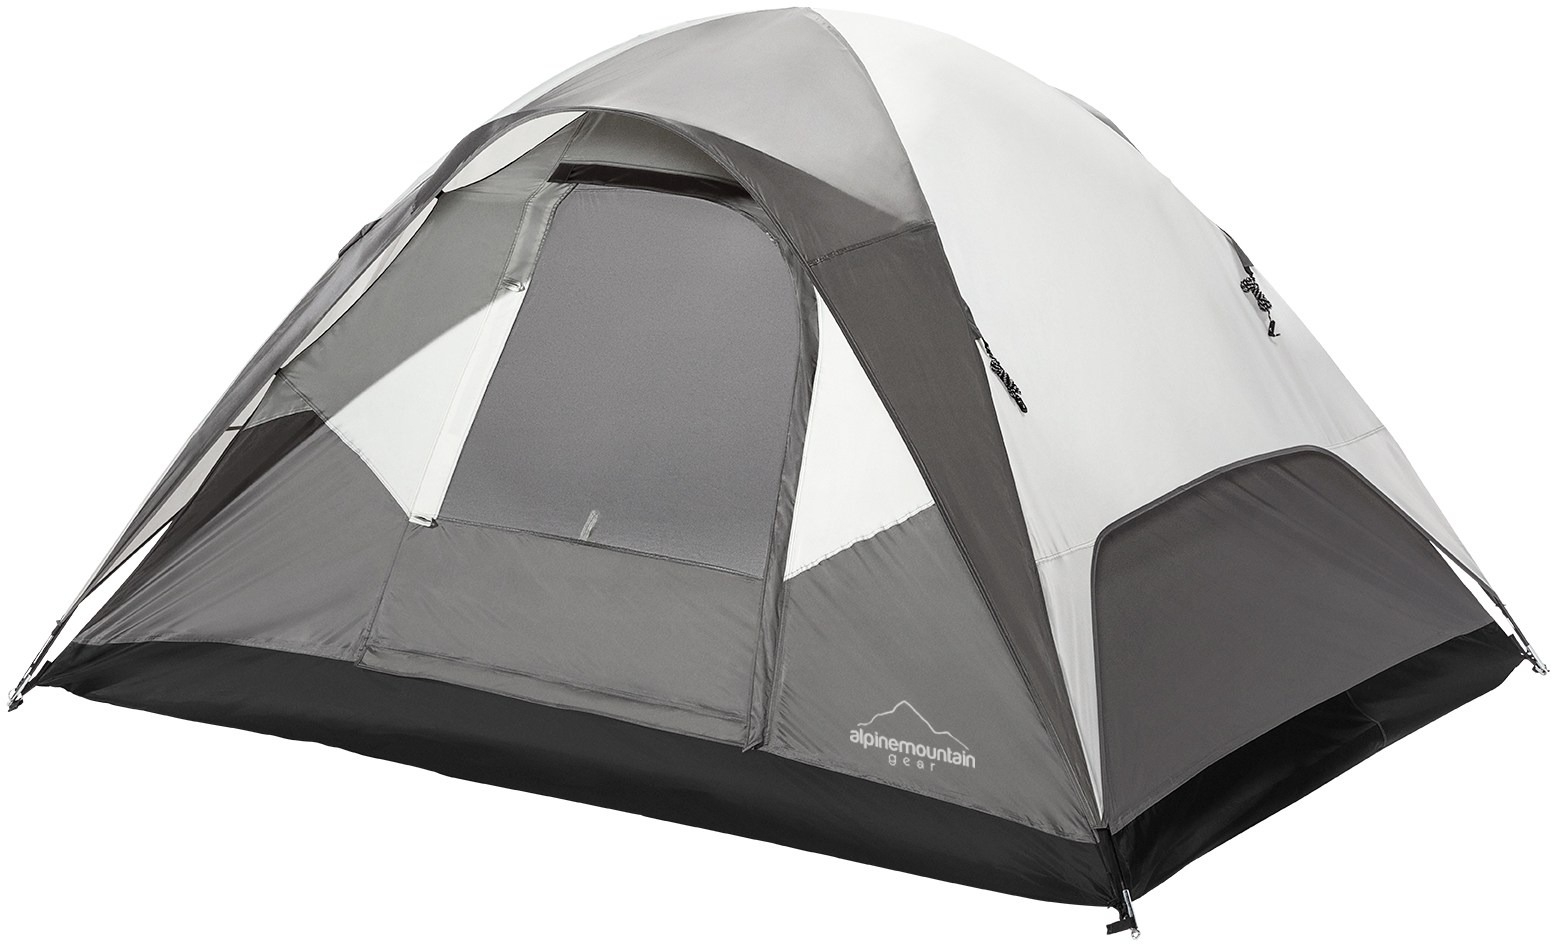 Dome tent designed for outdoor camping, featuring mesh and solid panels with a zipper door